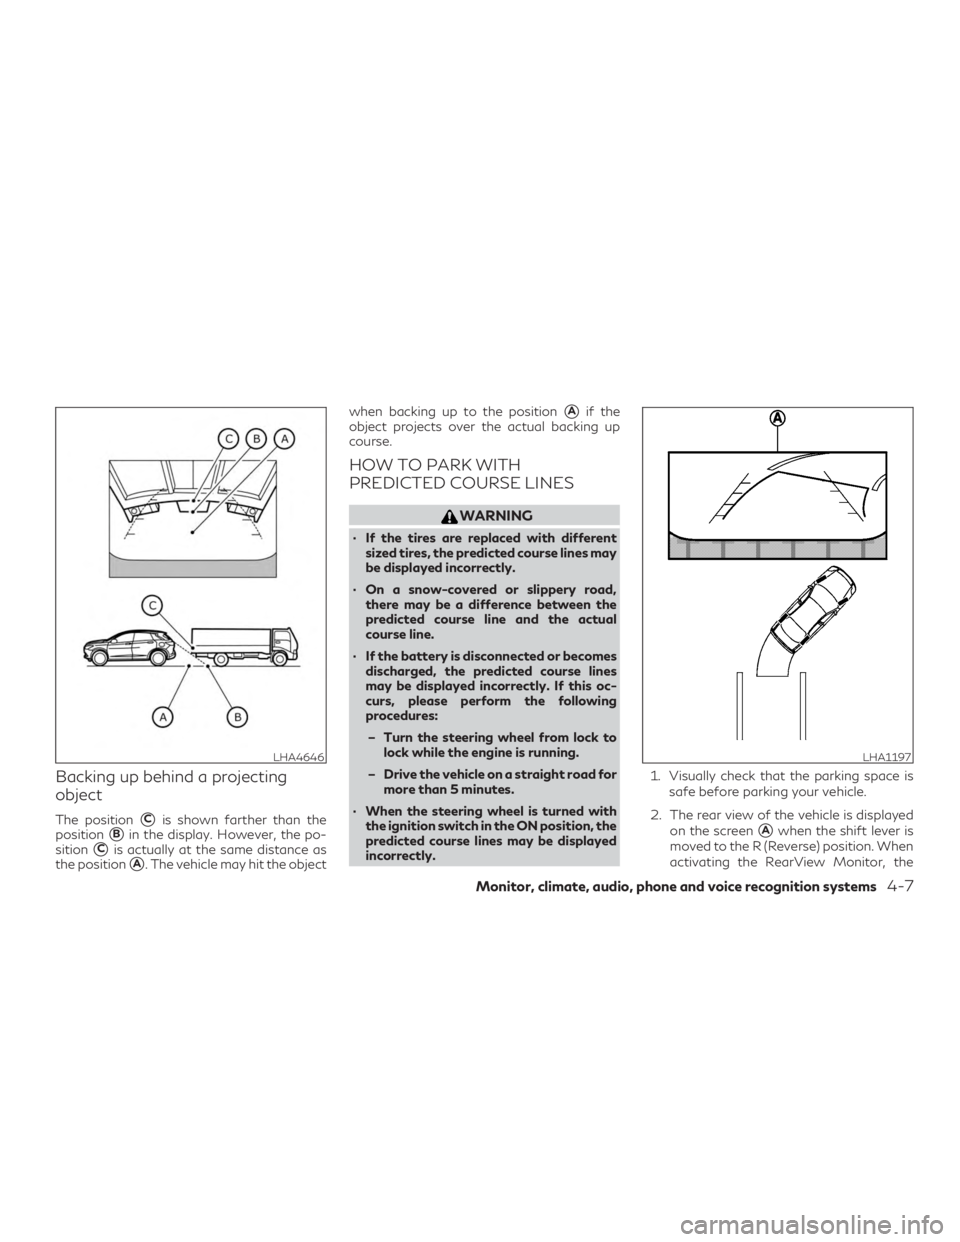 INFINITI QX50 2019 Service Manual Backing up behind a projecting
object
The positionCis shown farther than the
position
Bin the display. However, the po-
sition
Cis actually at the same distance as
the position
A. The vehicle may 